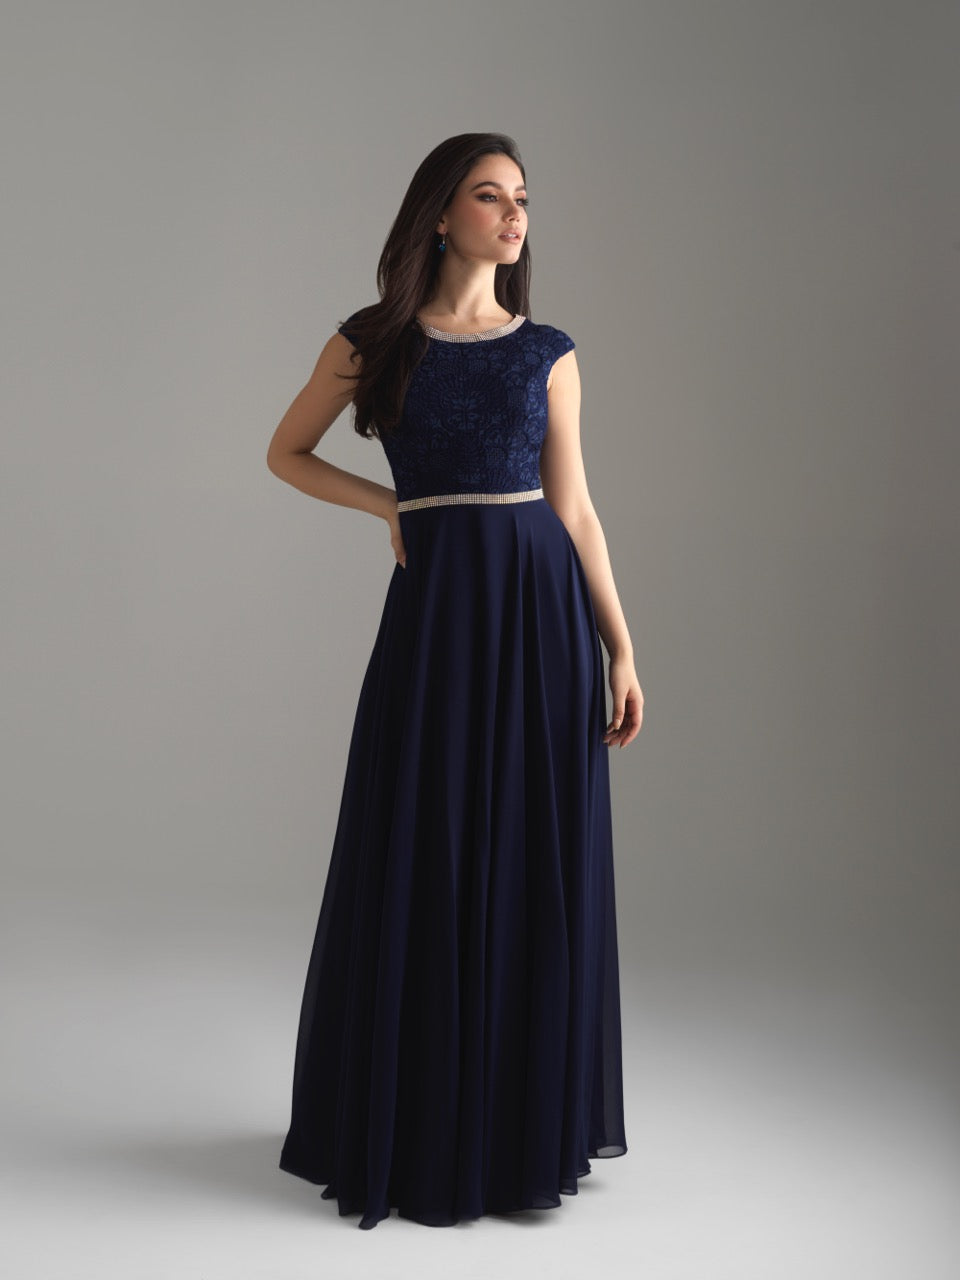 Madison James 18-802M Navy modest prom dress A-Line winter formal cap sleeves cheap Mormon Prom conservative